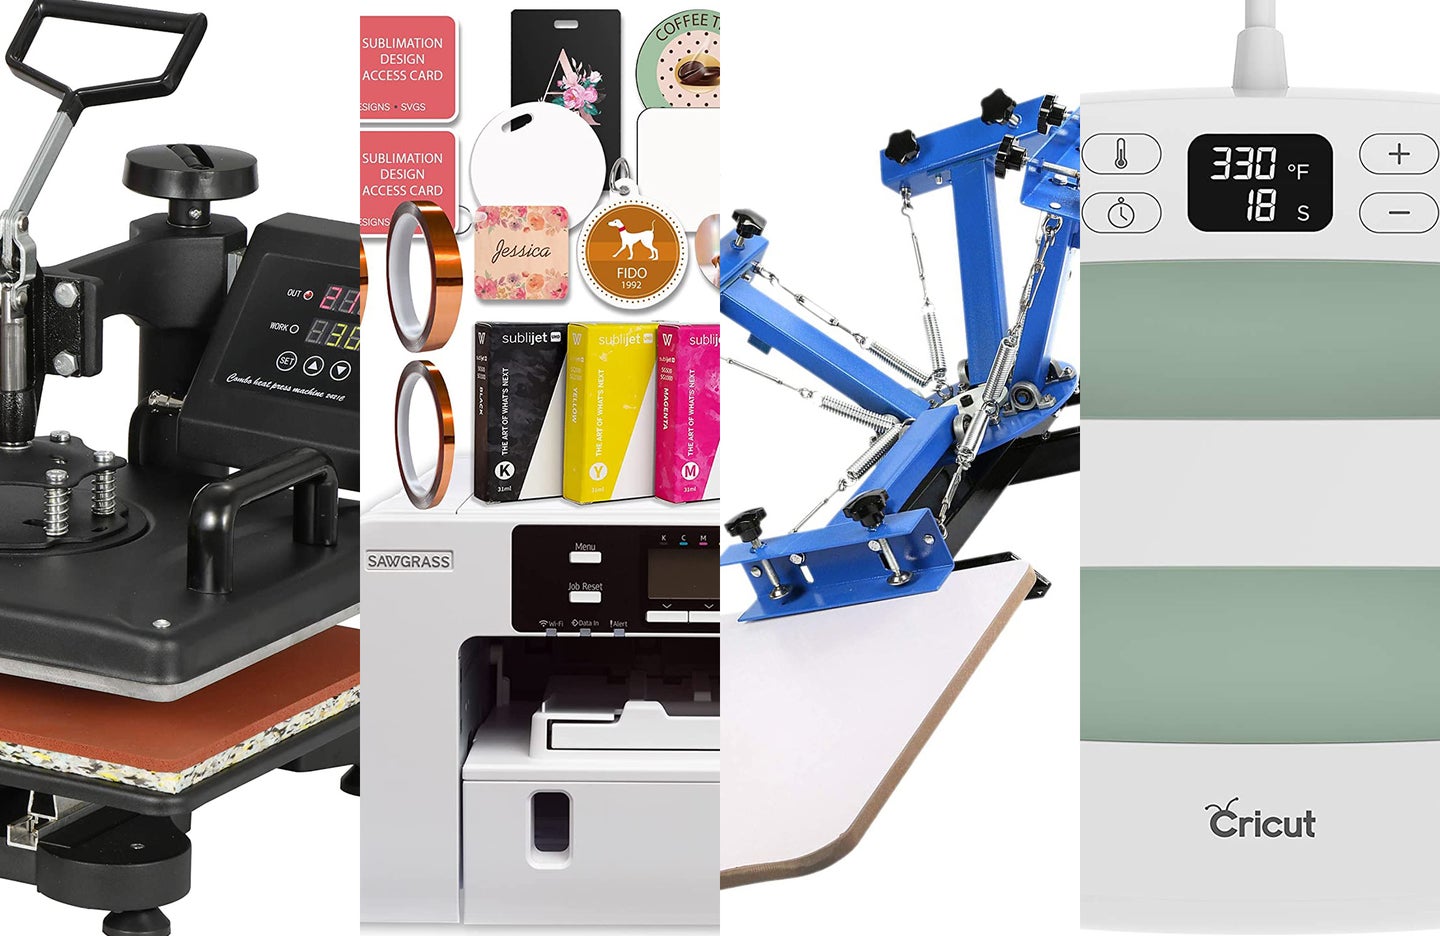 Screen Printing vs. Heat Press: Which is Better & Why - Press